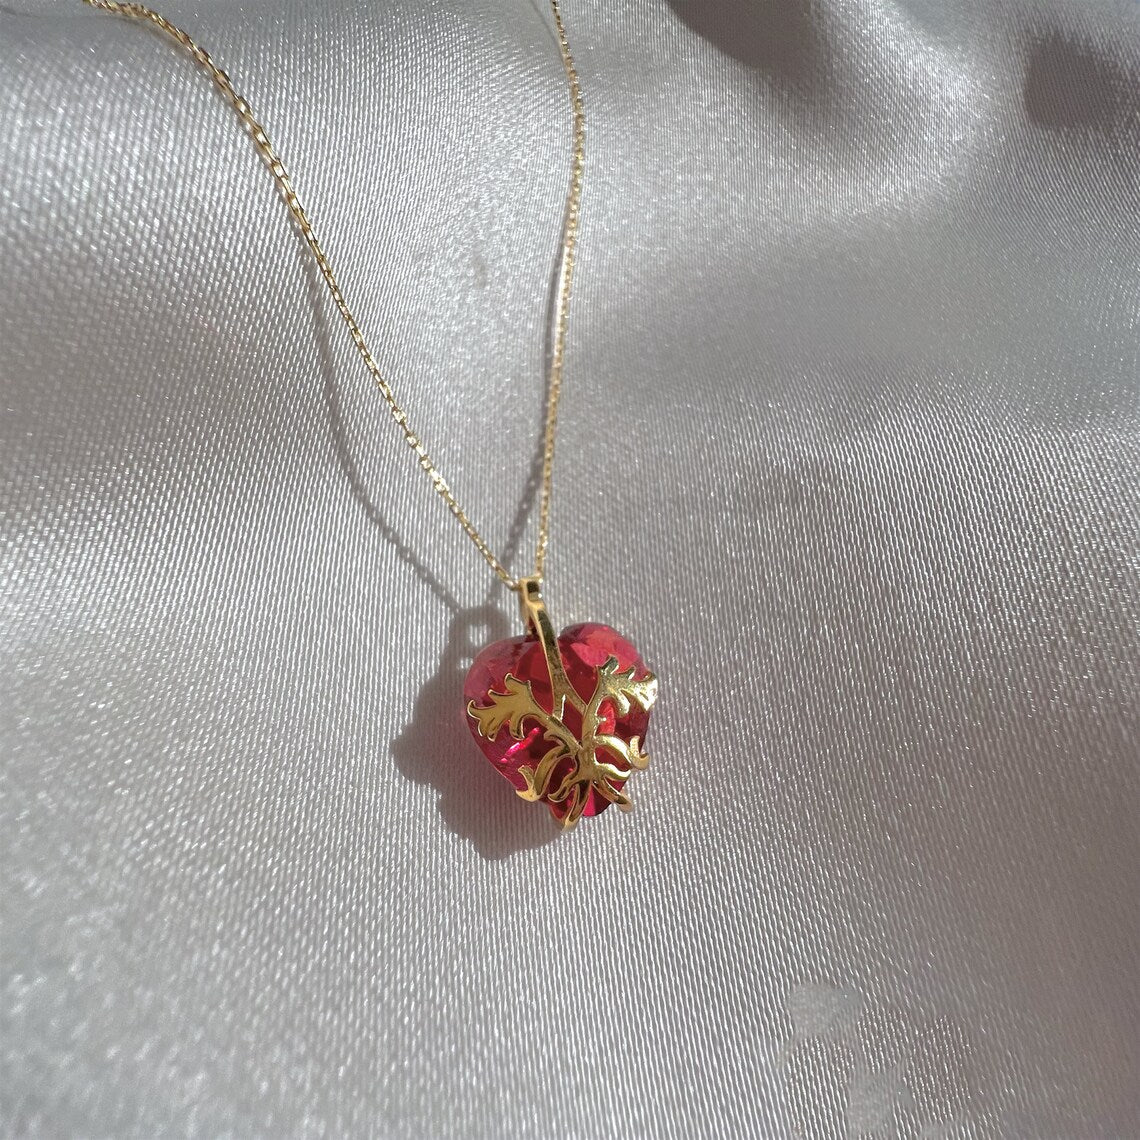 Gold and silver Plated Pendant of Eraklyon Bloom Necklace